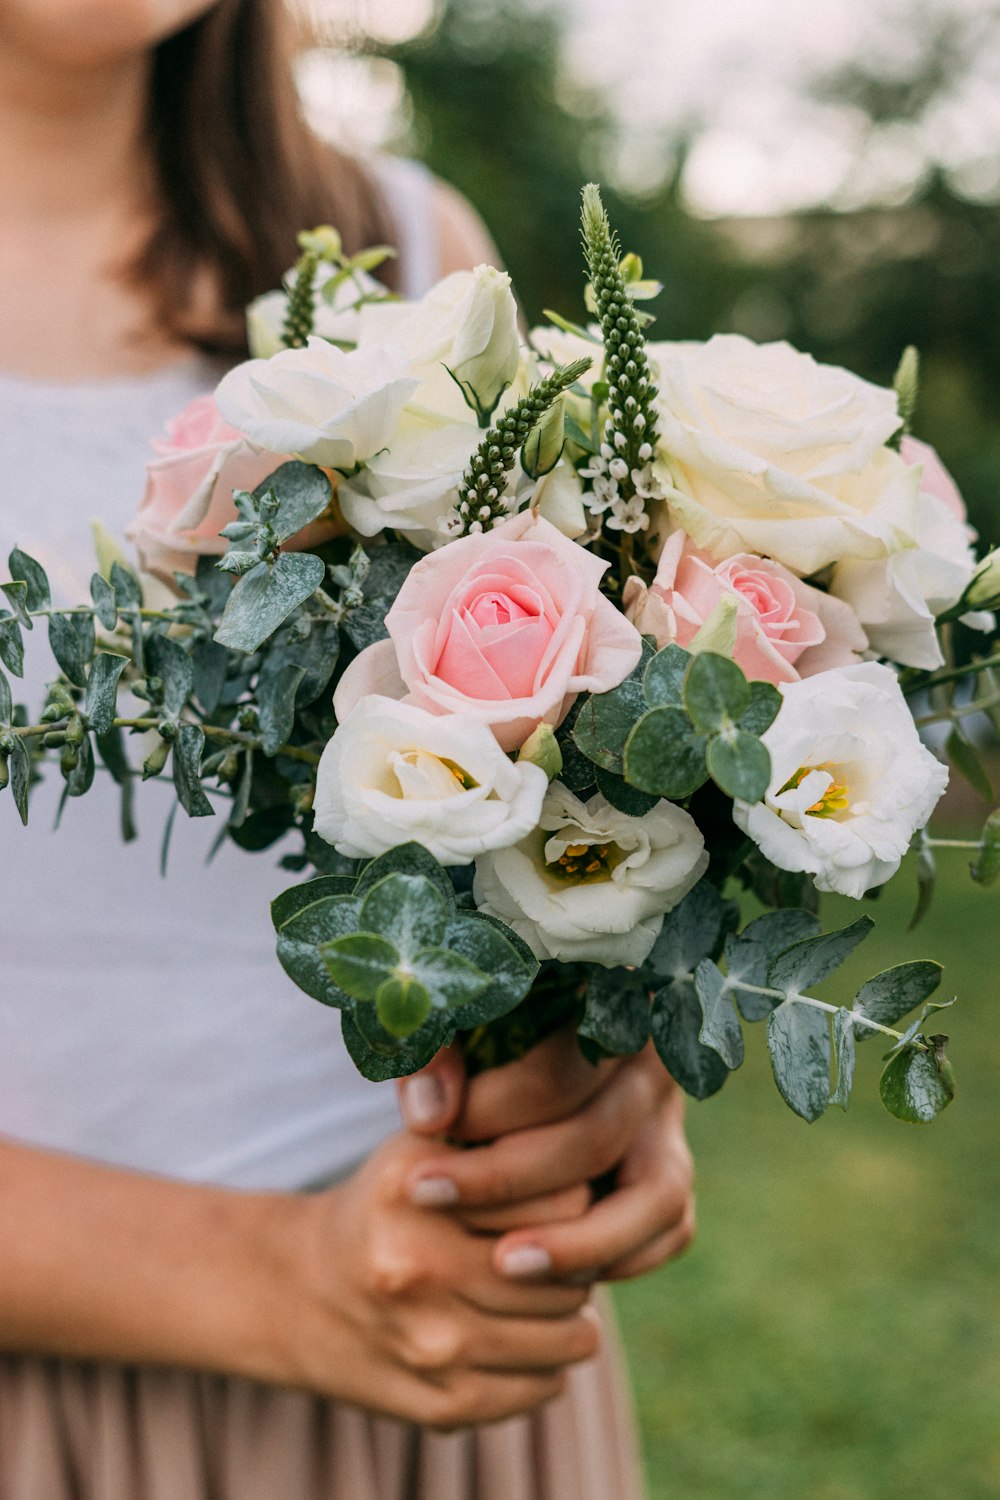 woman holding white and pink rose bouquet